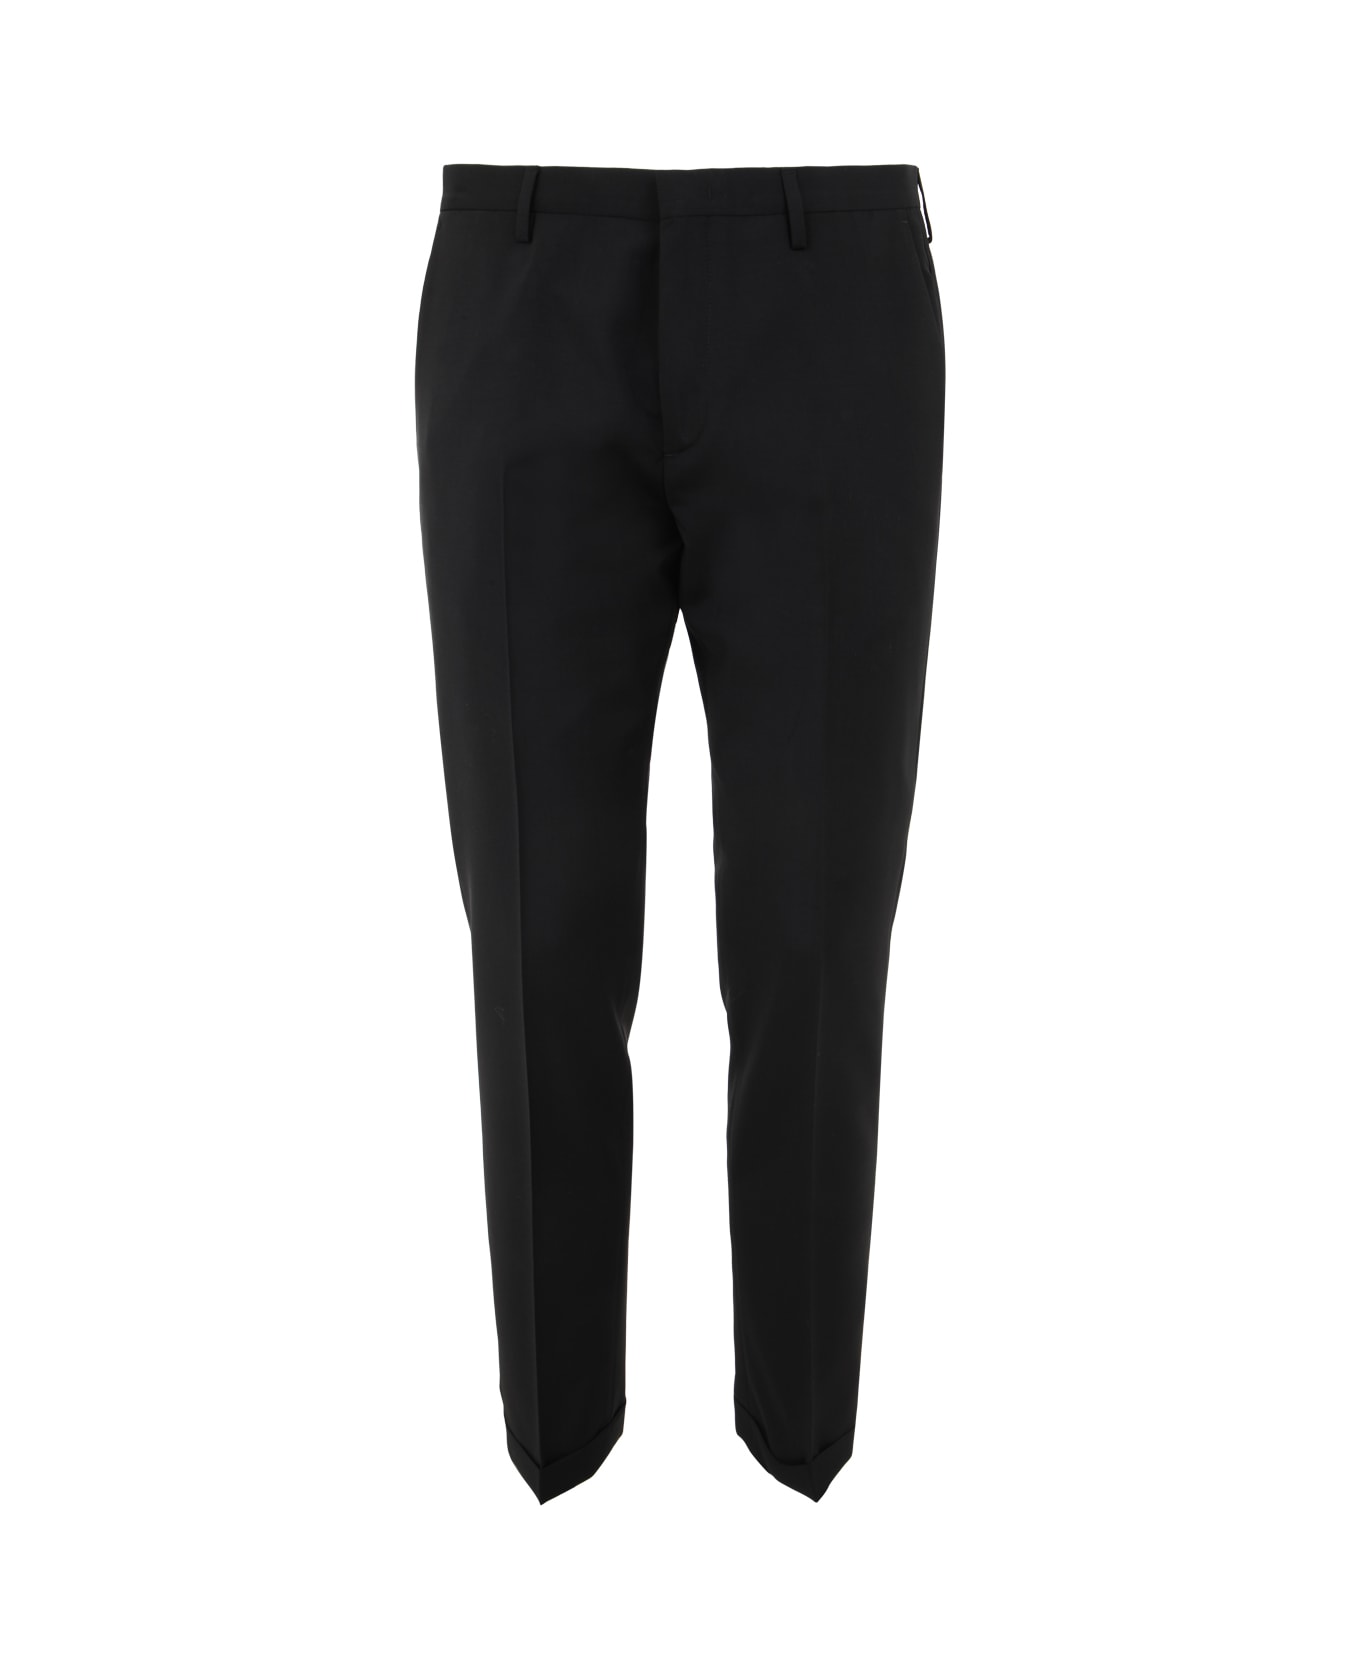 Paul Smith Mens Trousers - Black ボトムス